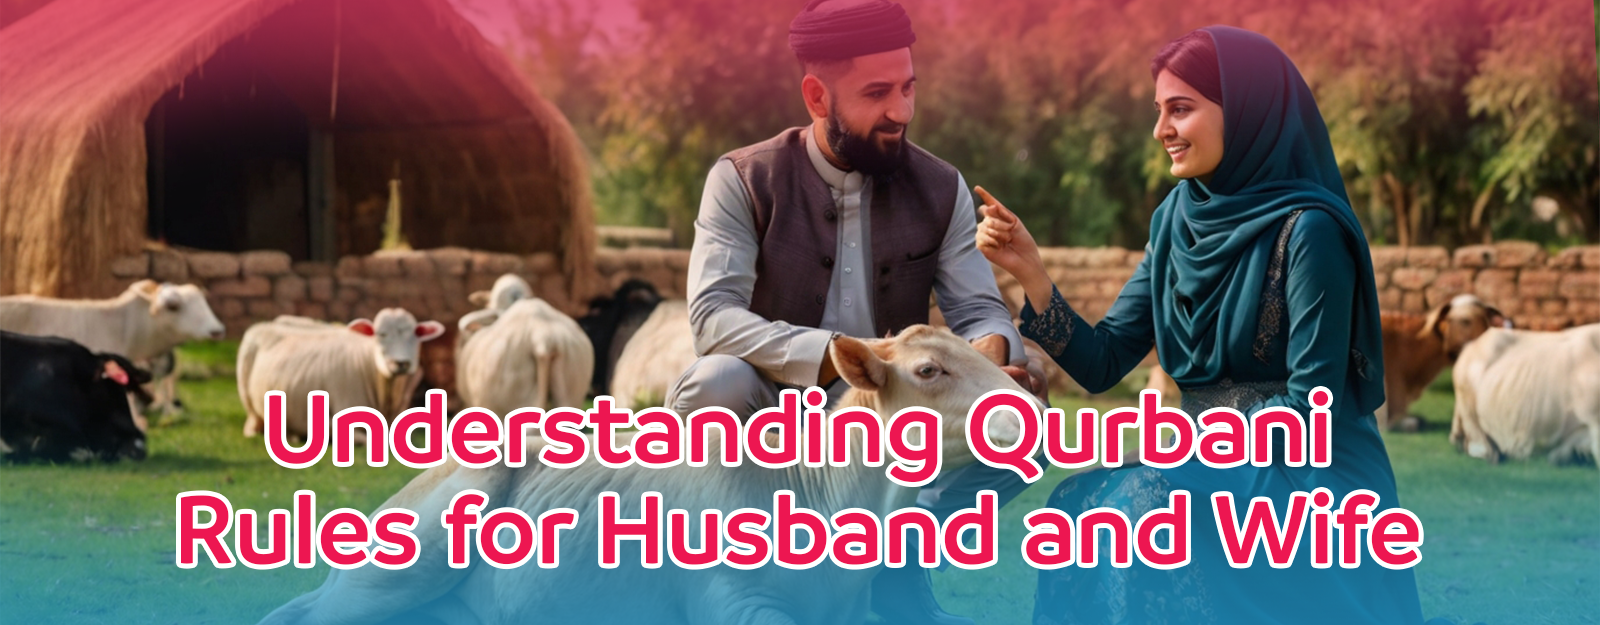 Qurbani Rules For Husband And Wife